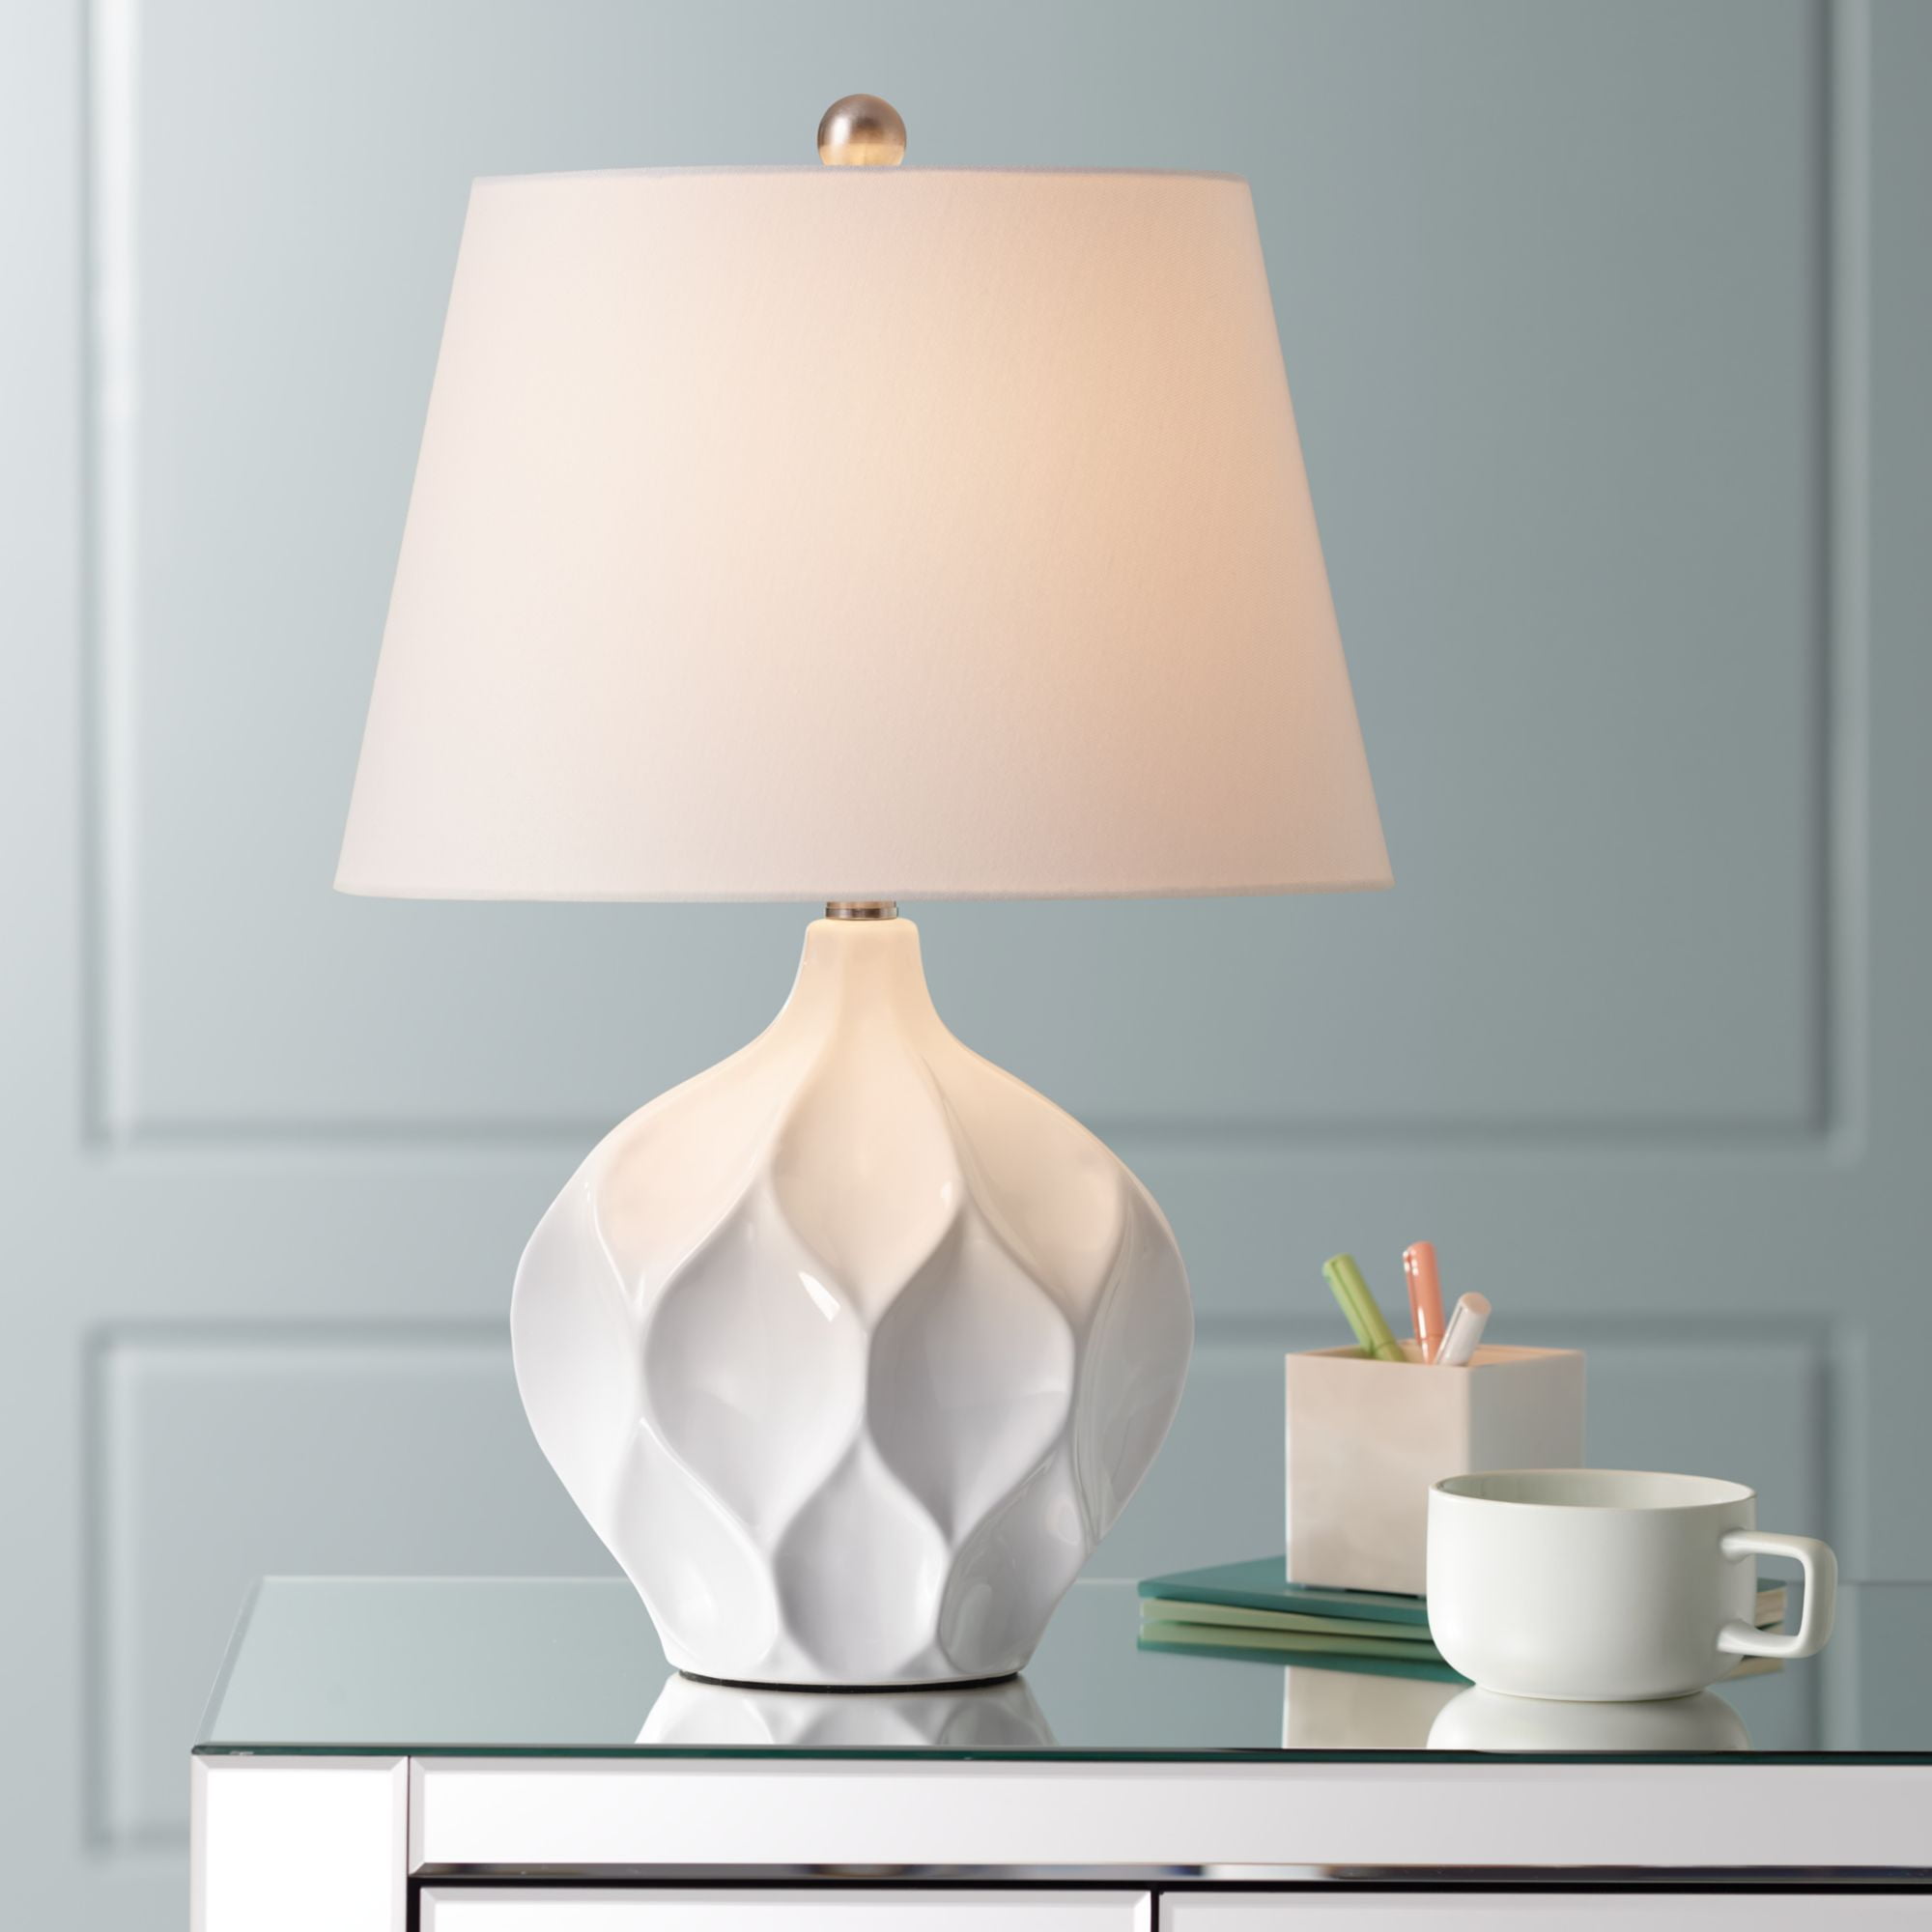 Mate a Plate Rolled in on The lamp Base Rico Table Lamp with Shade 